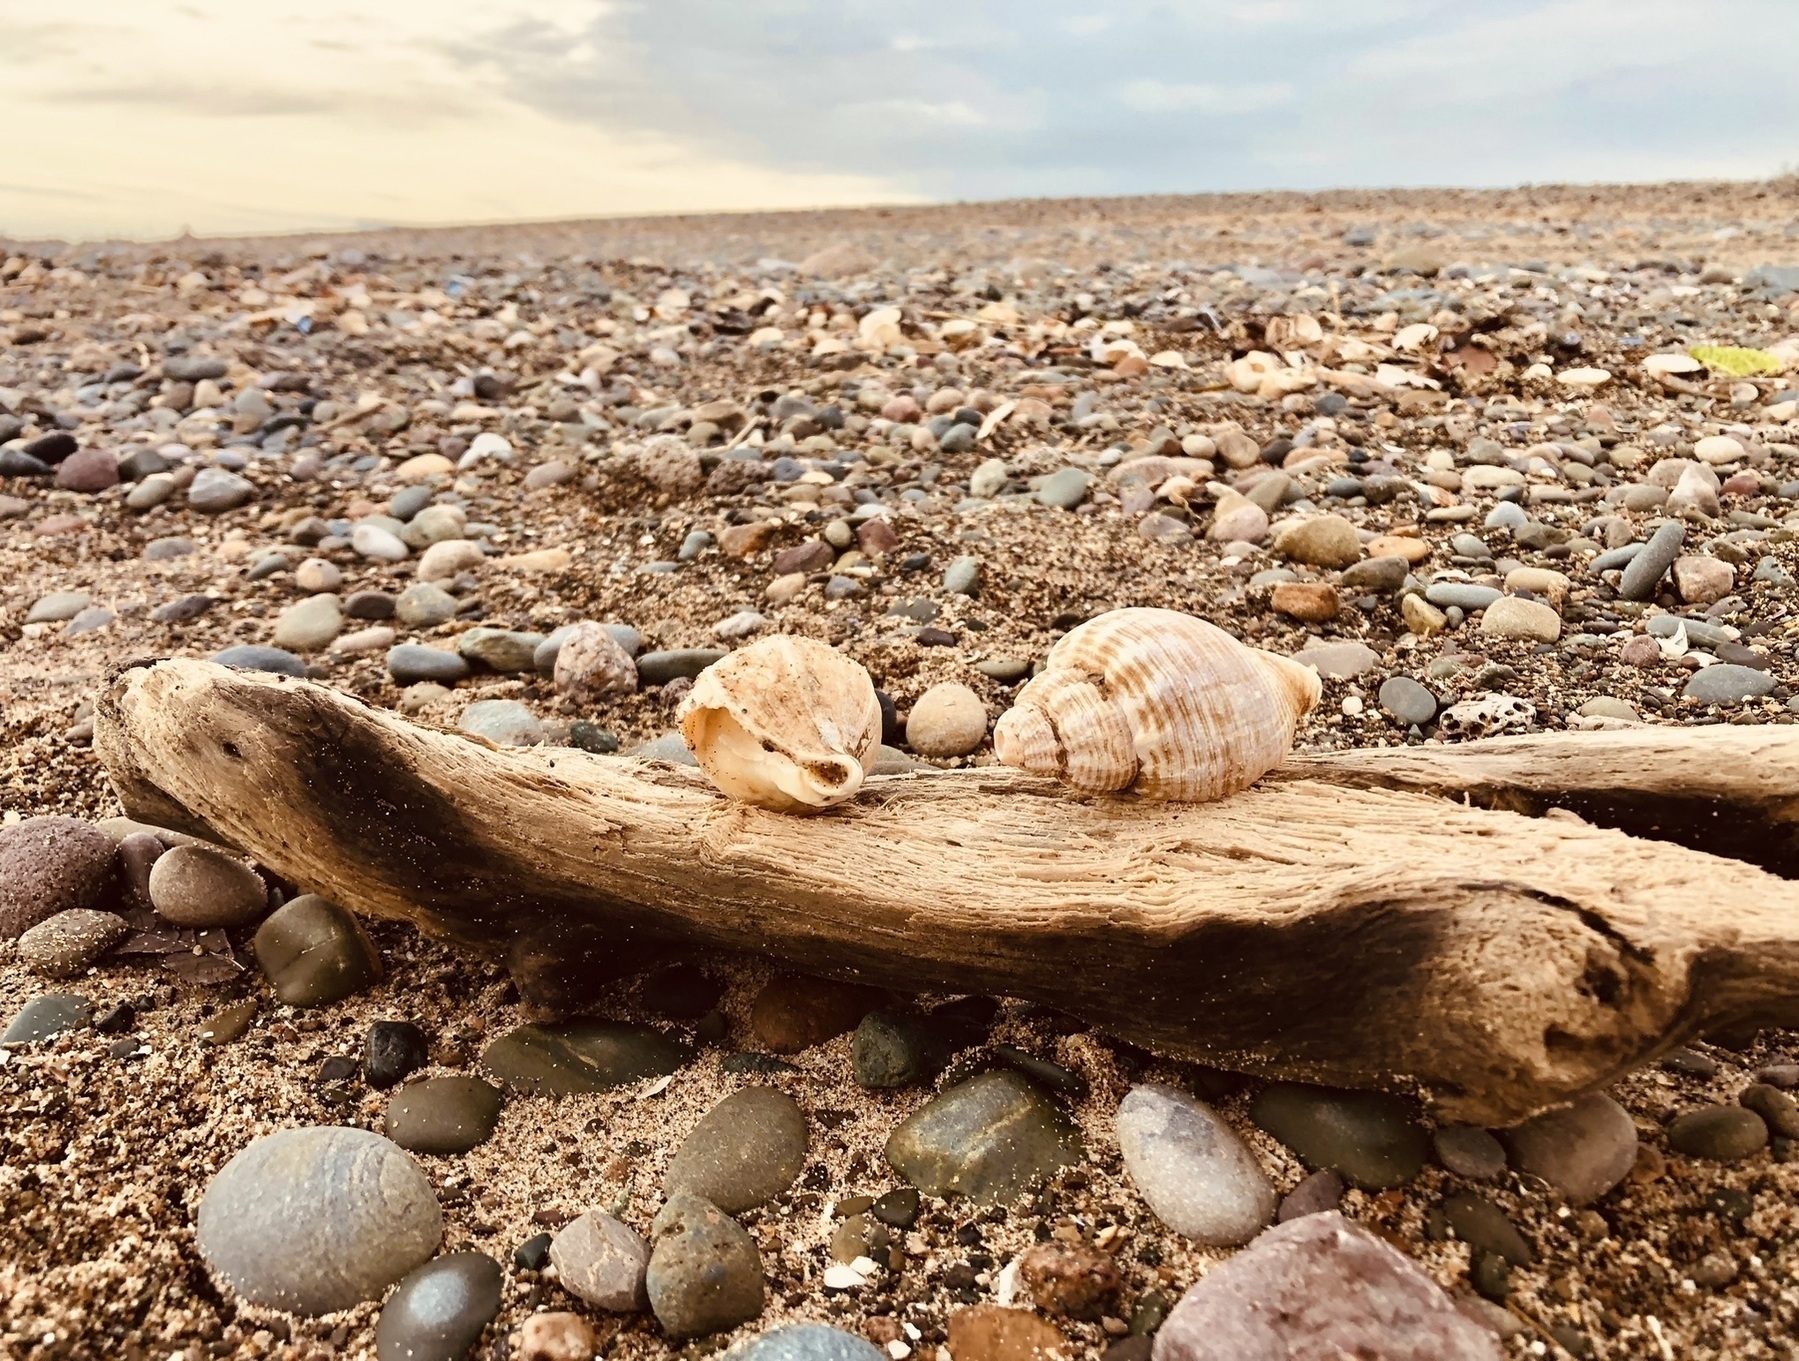 shells on a piece of driftwood with a stony beach beyond